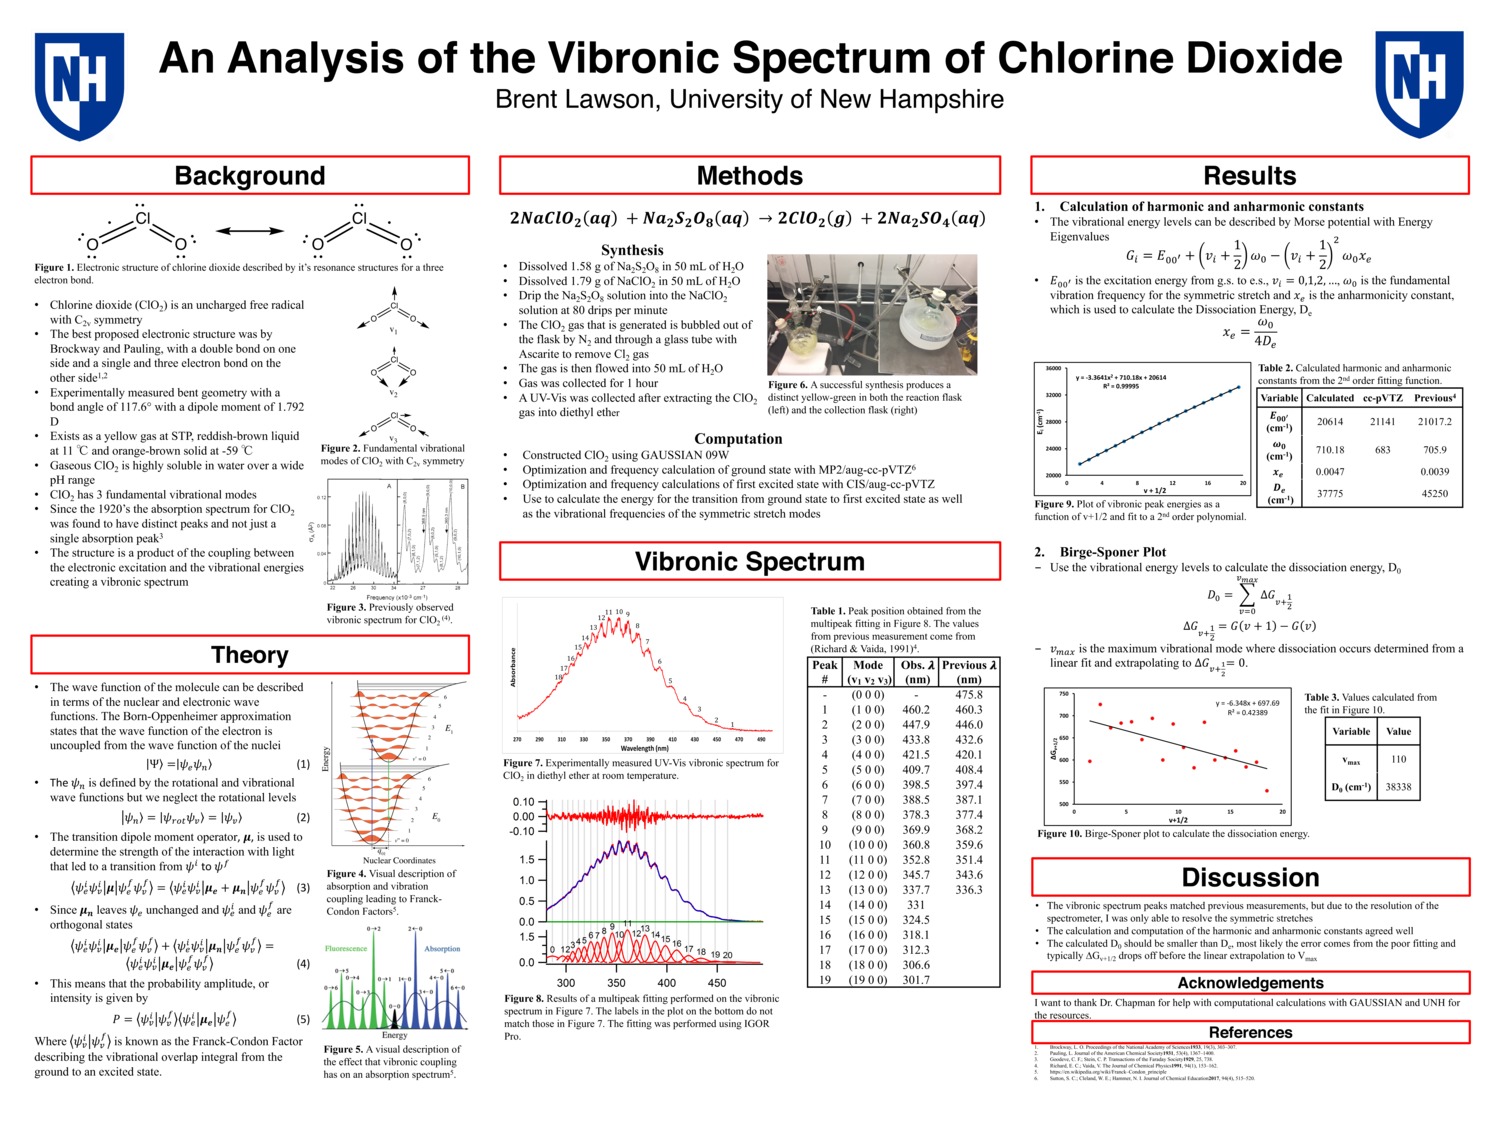 An Analysis Of The Vibronic Spectrum Of Chlorine Dioxide by bnl2000